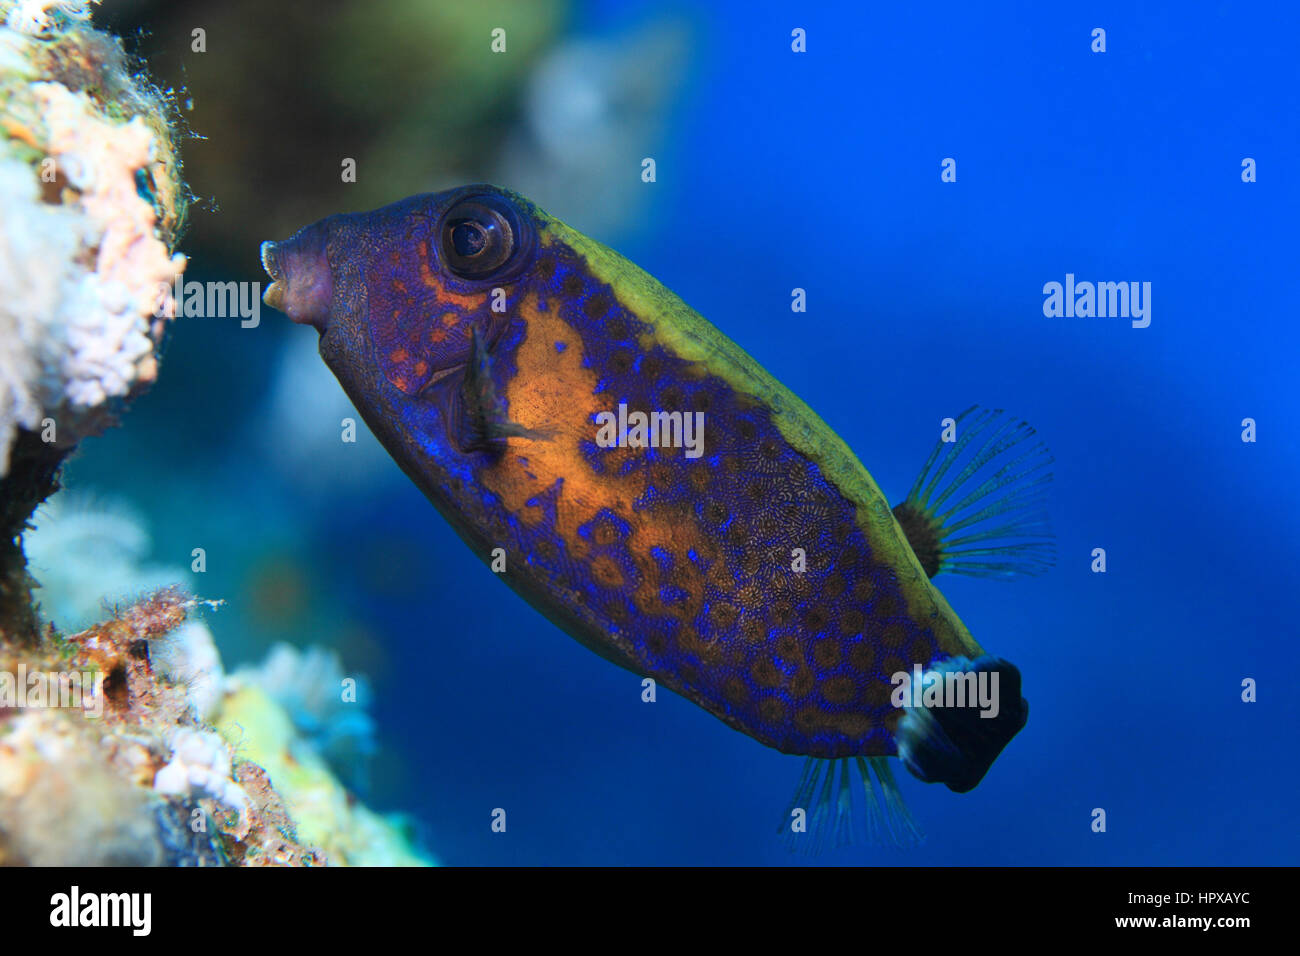 Bluetail trunkfish (Ostracion cyanurus) underwater in the tropical Red Sea Stock Photo